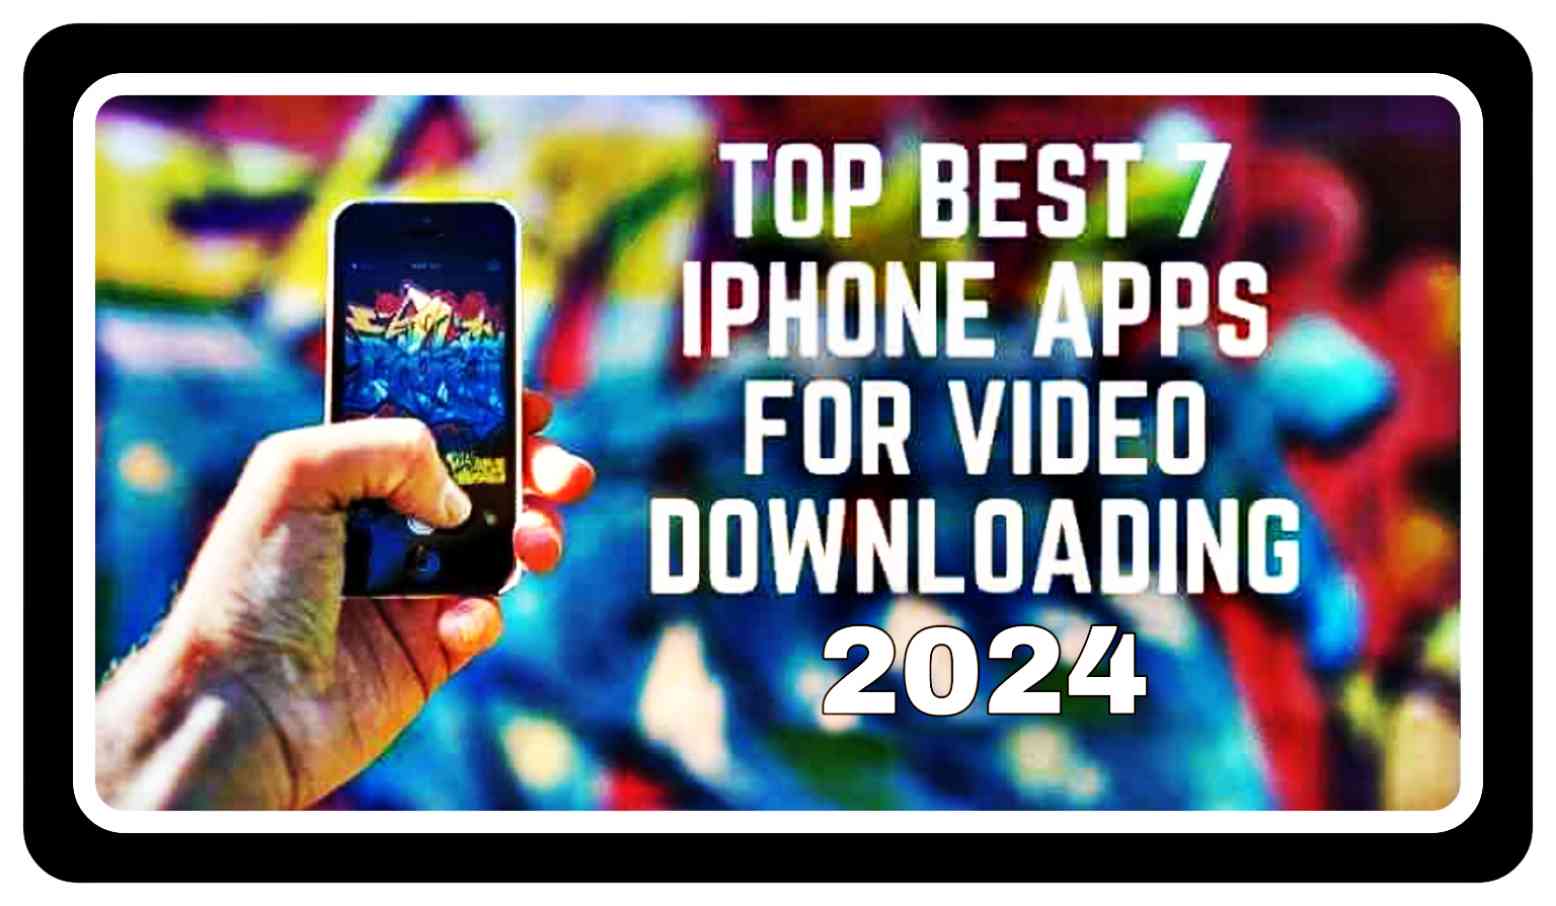 Which is the Top Best 7 iPhone Apps for Video Downloading 2024